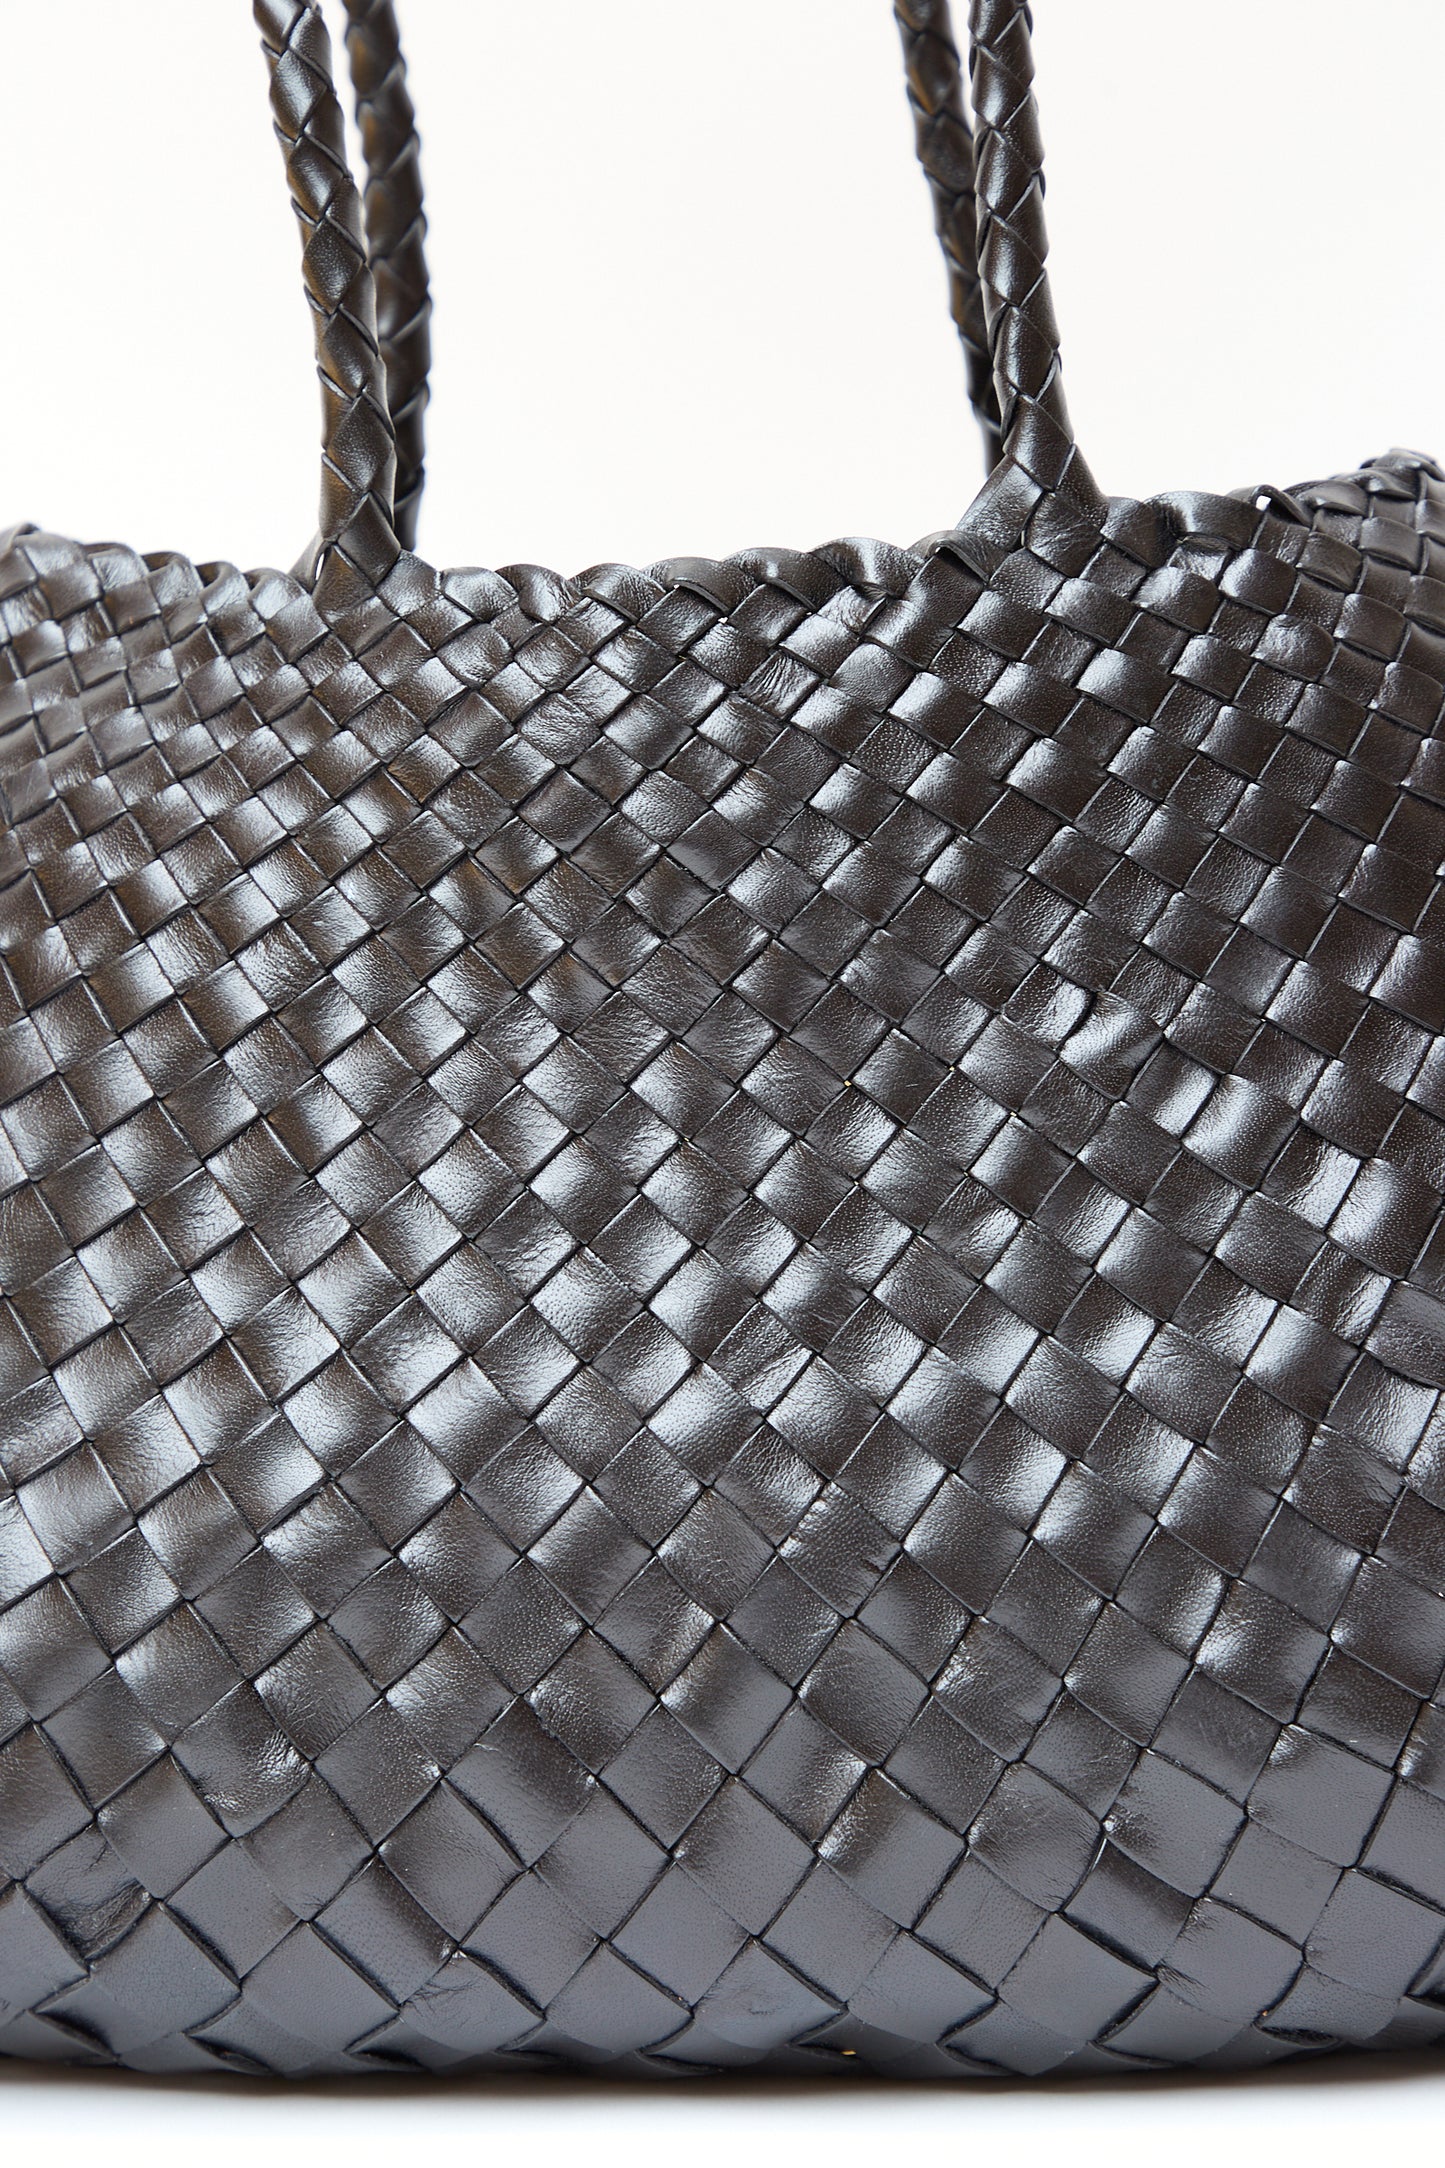 Close-up of a textured, handwoven leather Santa Croce Big handbag in Black, showcasing intricate details and craftsmanship by Dragon Diffusion.